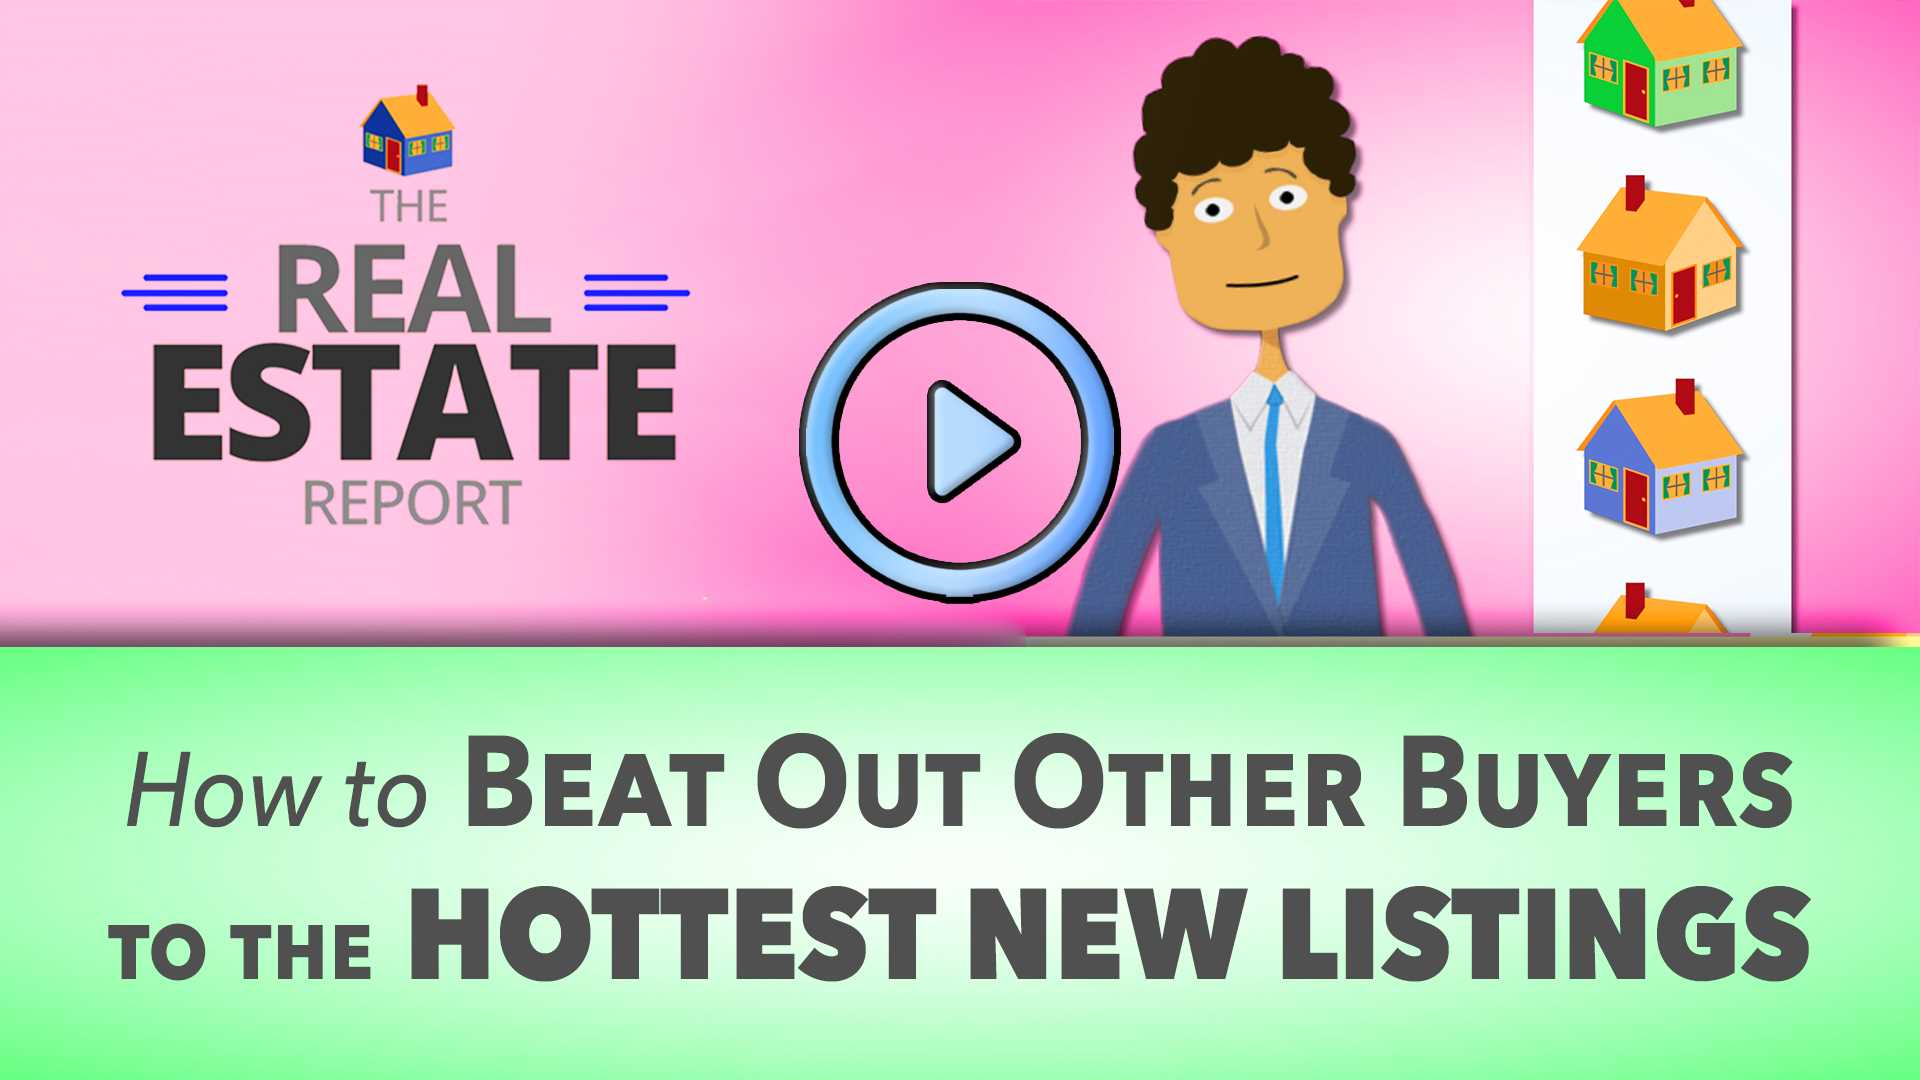 How to Beat Out Other Buyers to the Hottest New Listings